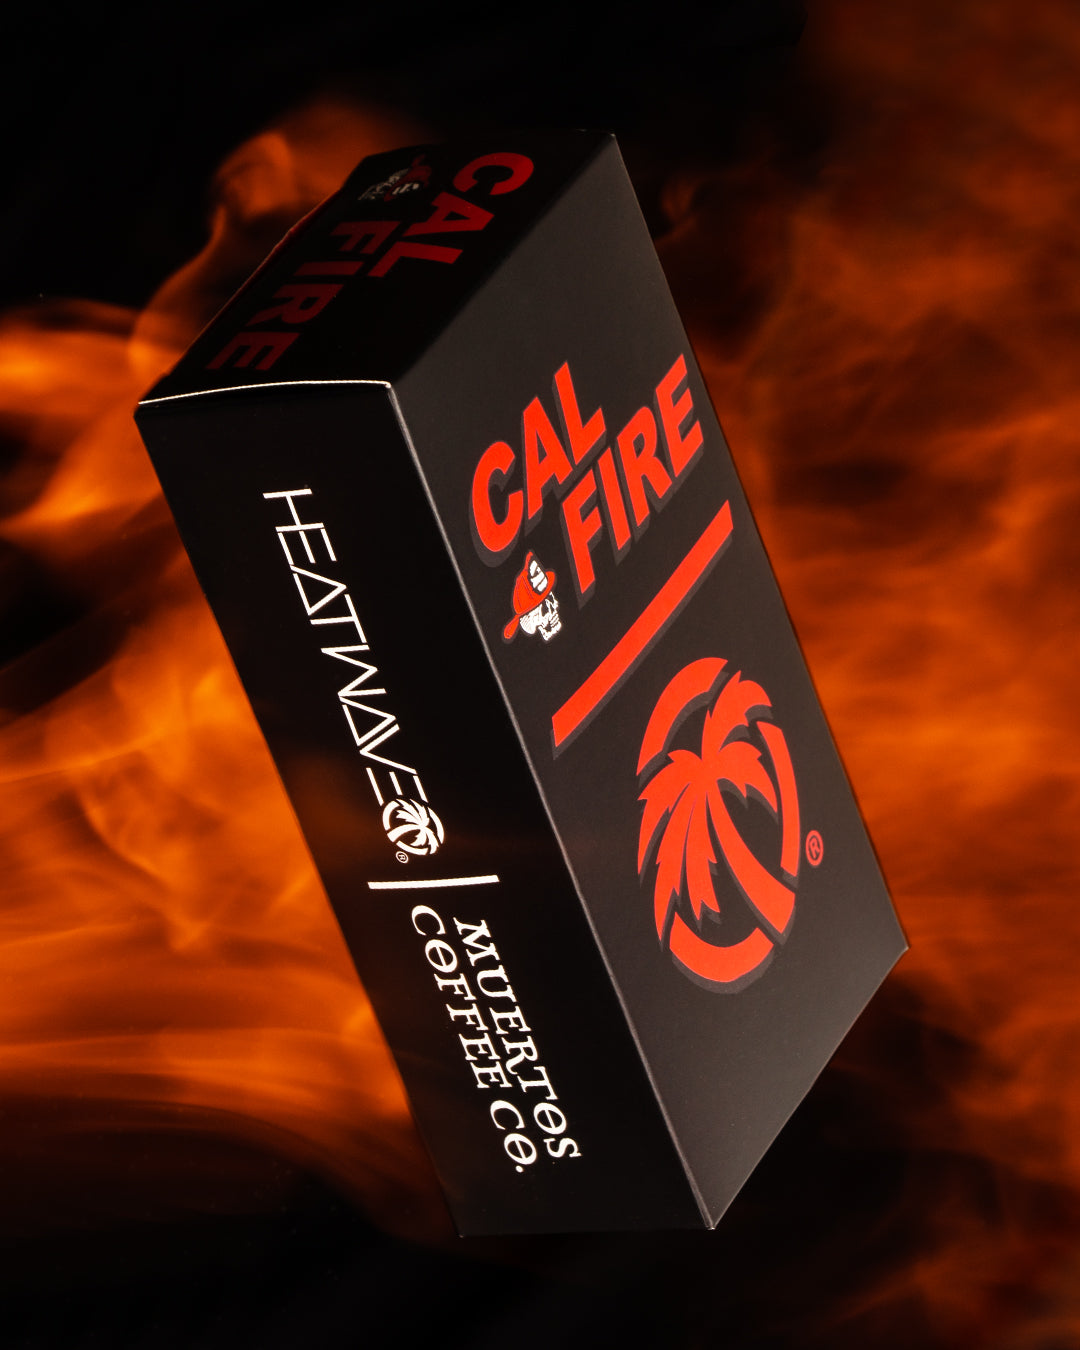 Heat Wave Visual Cal Fire XL Vise Sunglasses box engulfed in flames. 